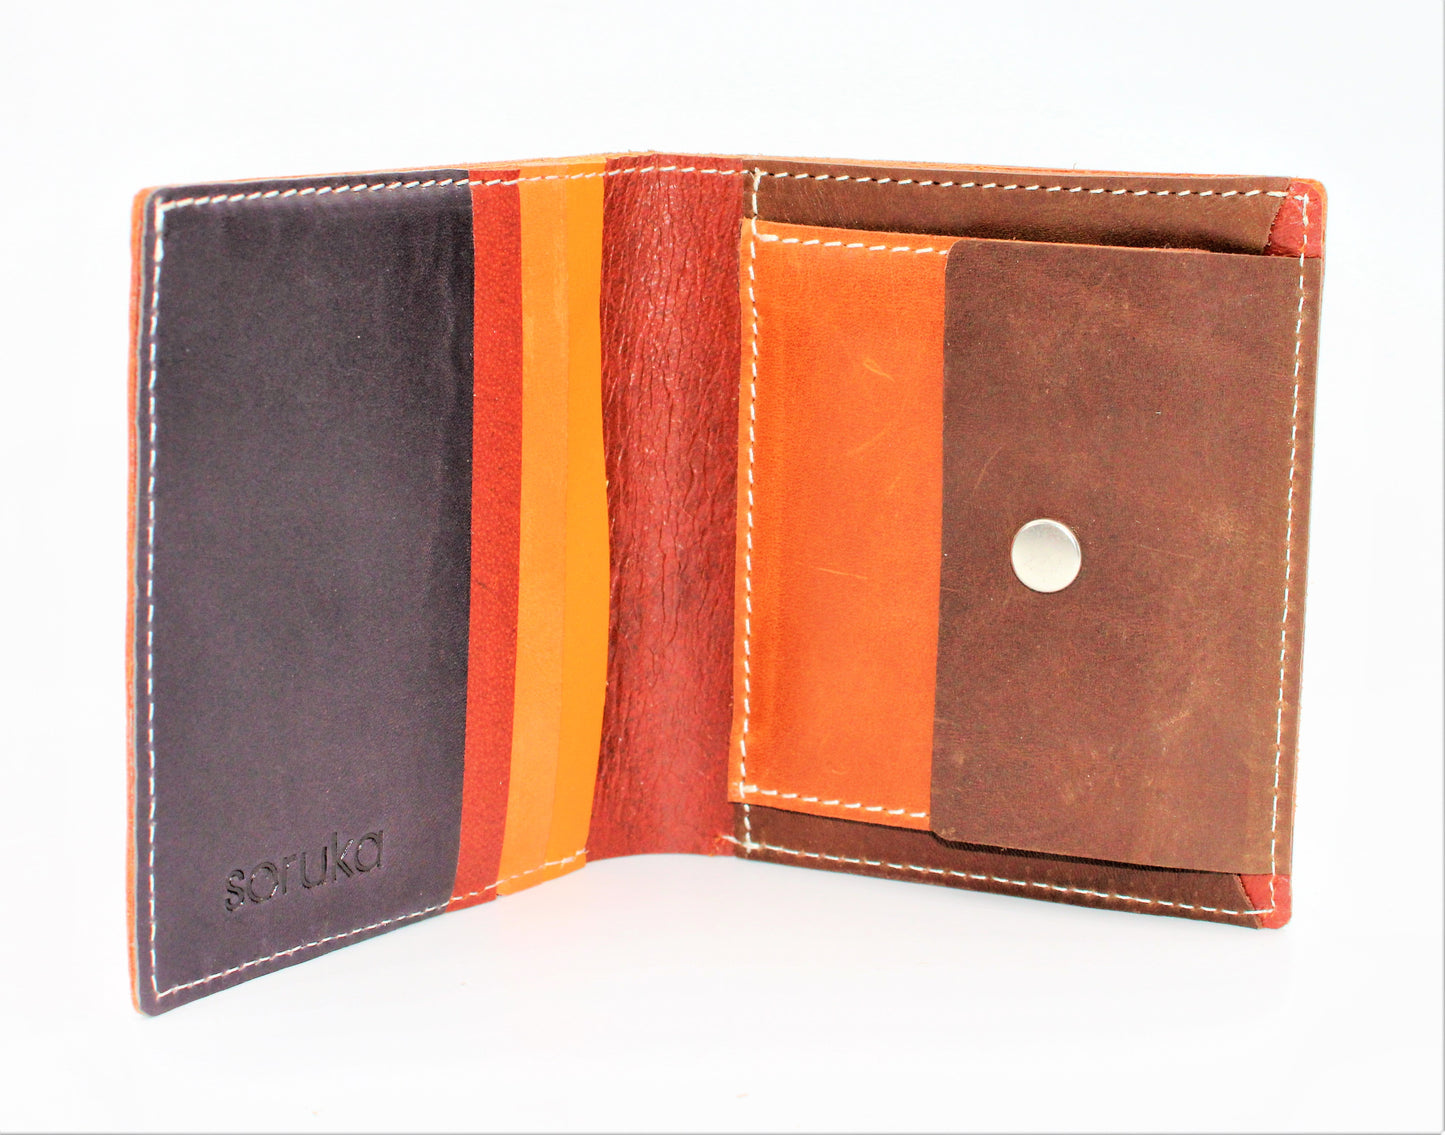 Interior of Hunter Plain Leather Wallet